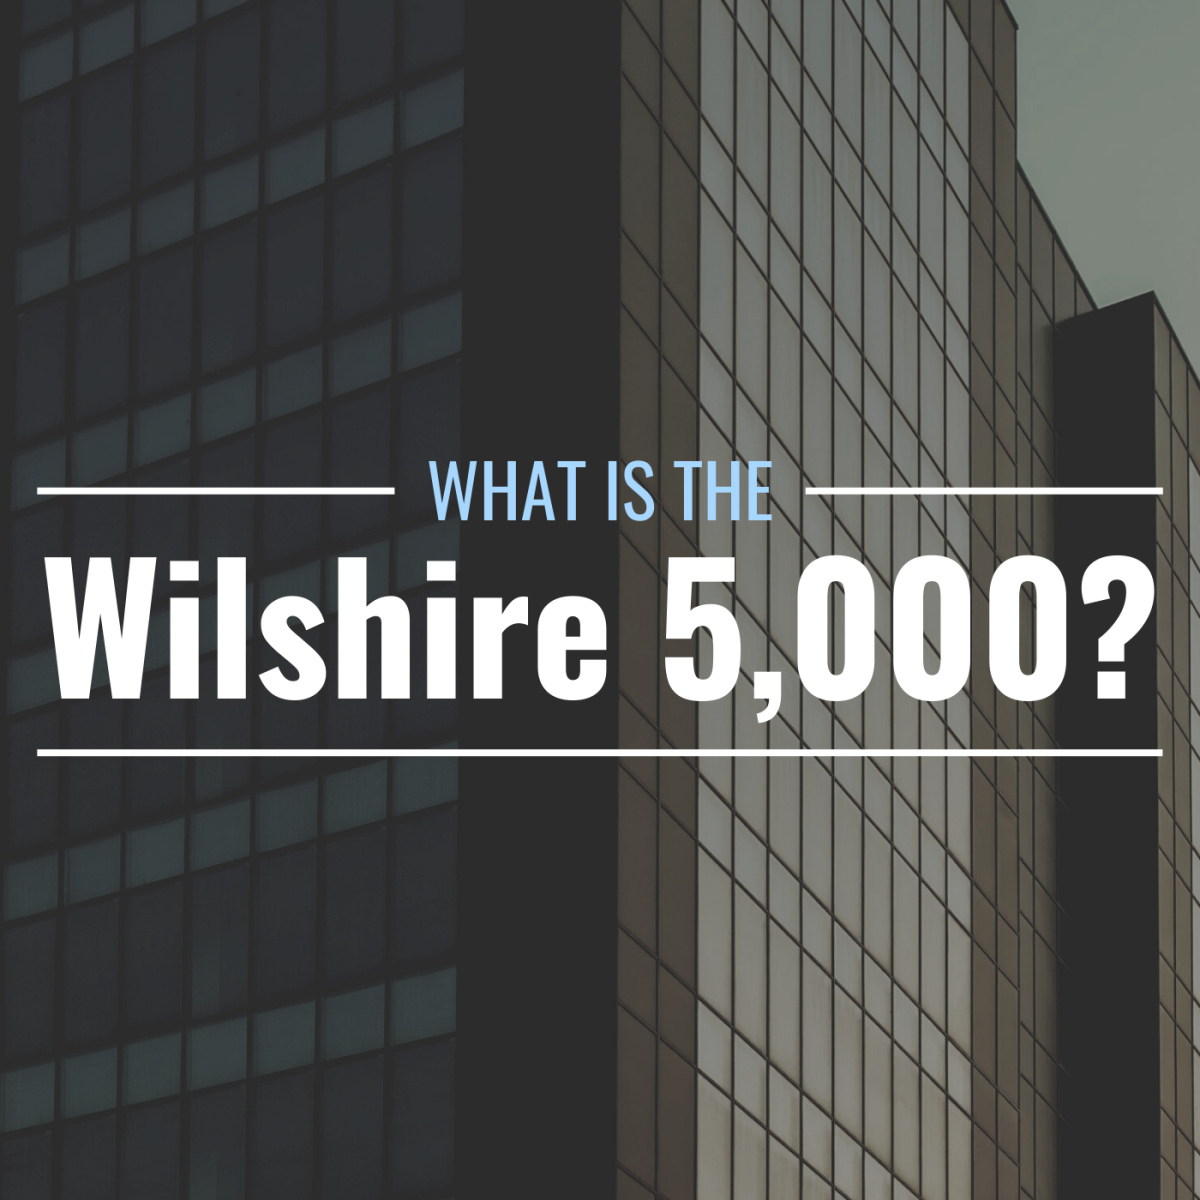 Darkened photo of a tall office building with text overlay that reads "What Is the Wilshire 5,000?"